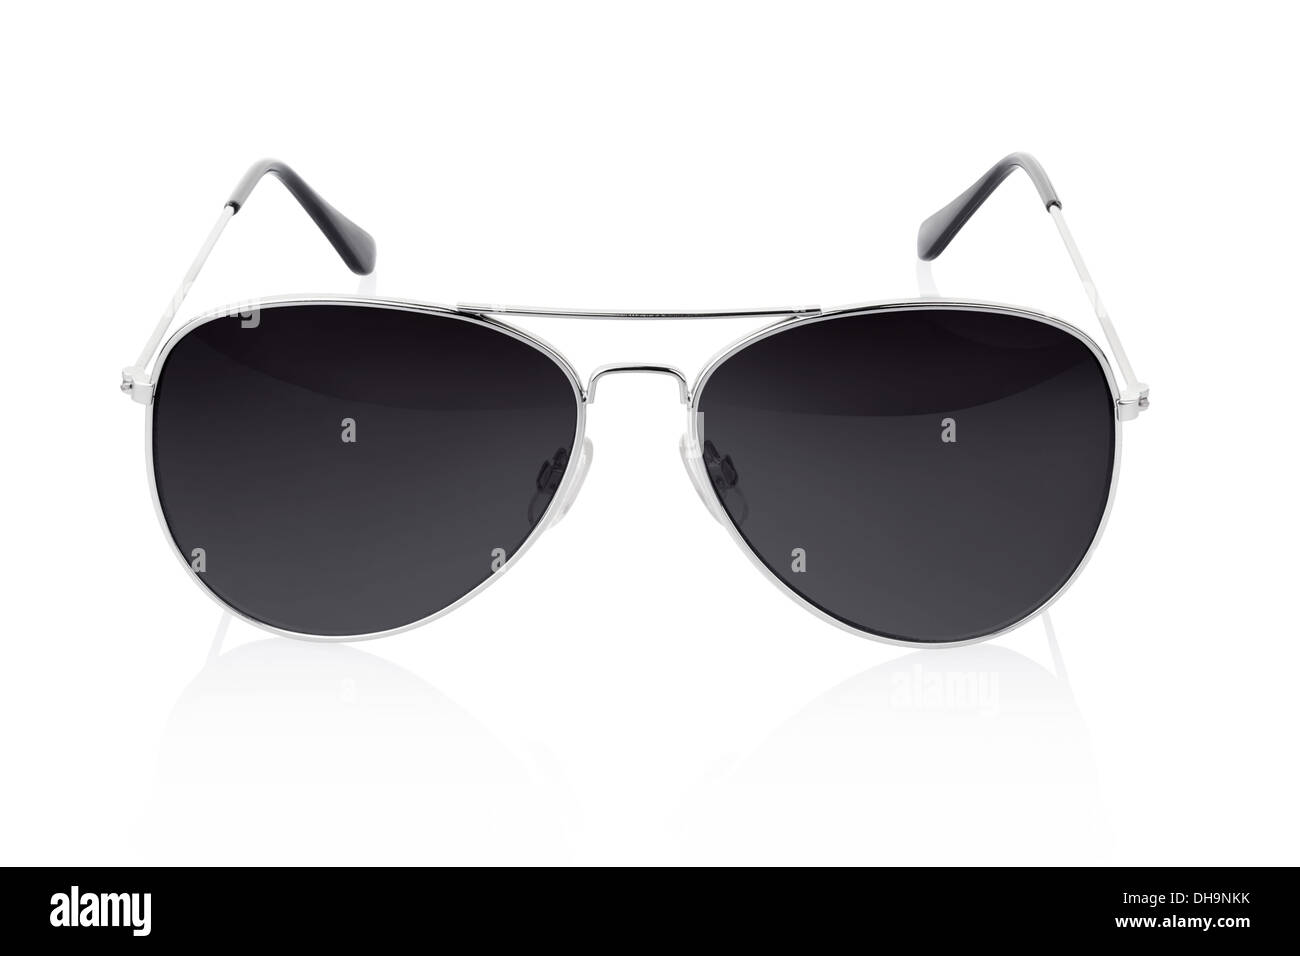 Sunglass Cut Out Stock Images & Pictures - Alamy